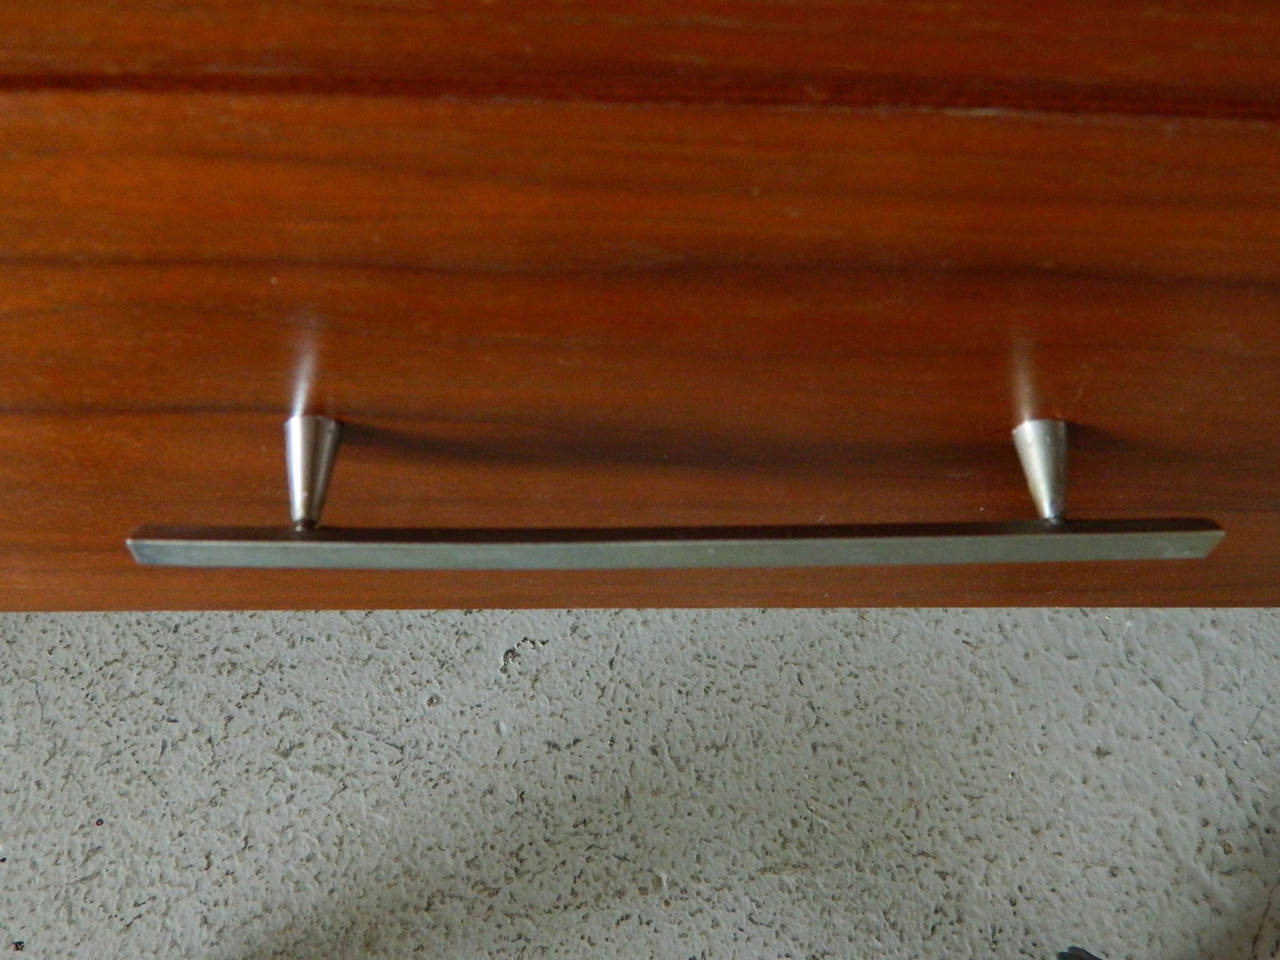 20th Century Paul McCobb Chest of Drawers for Calvin Furniture